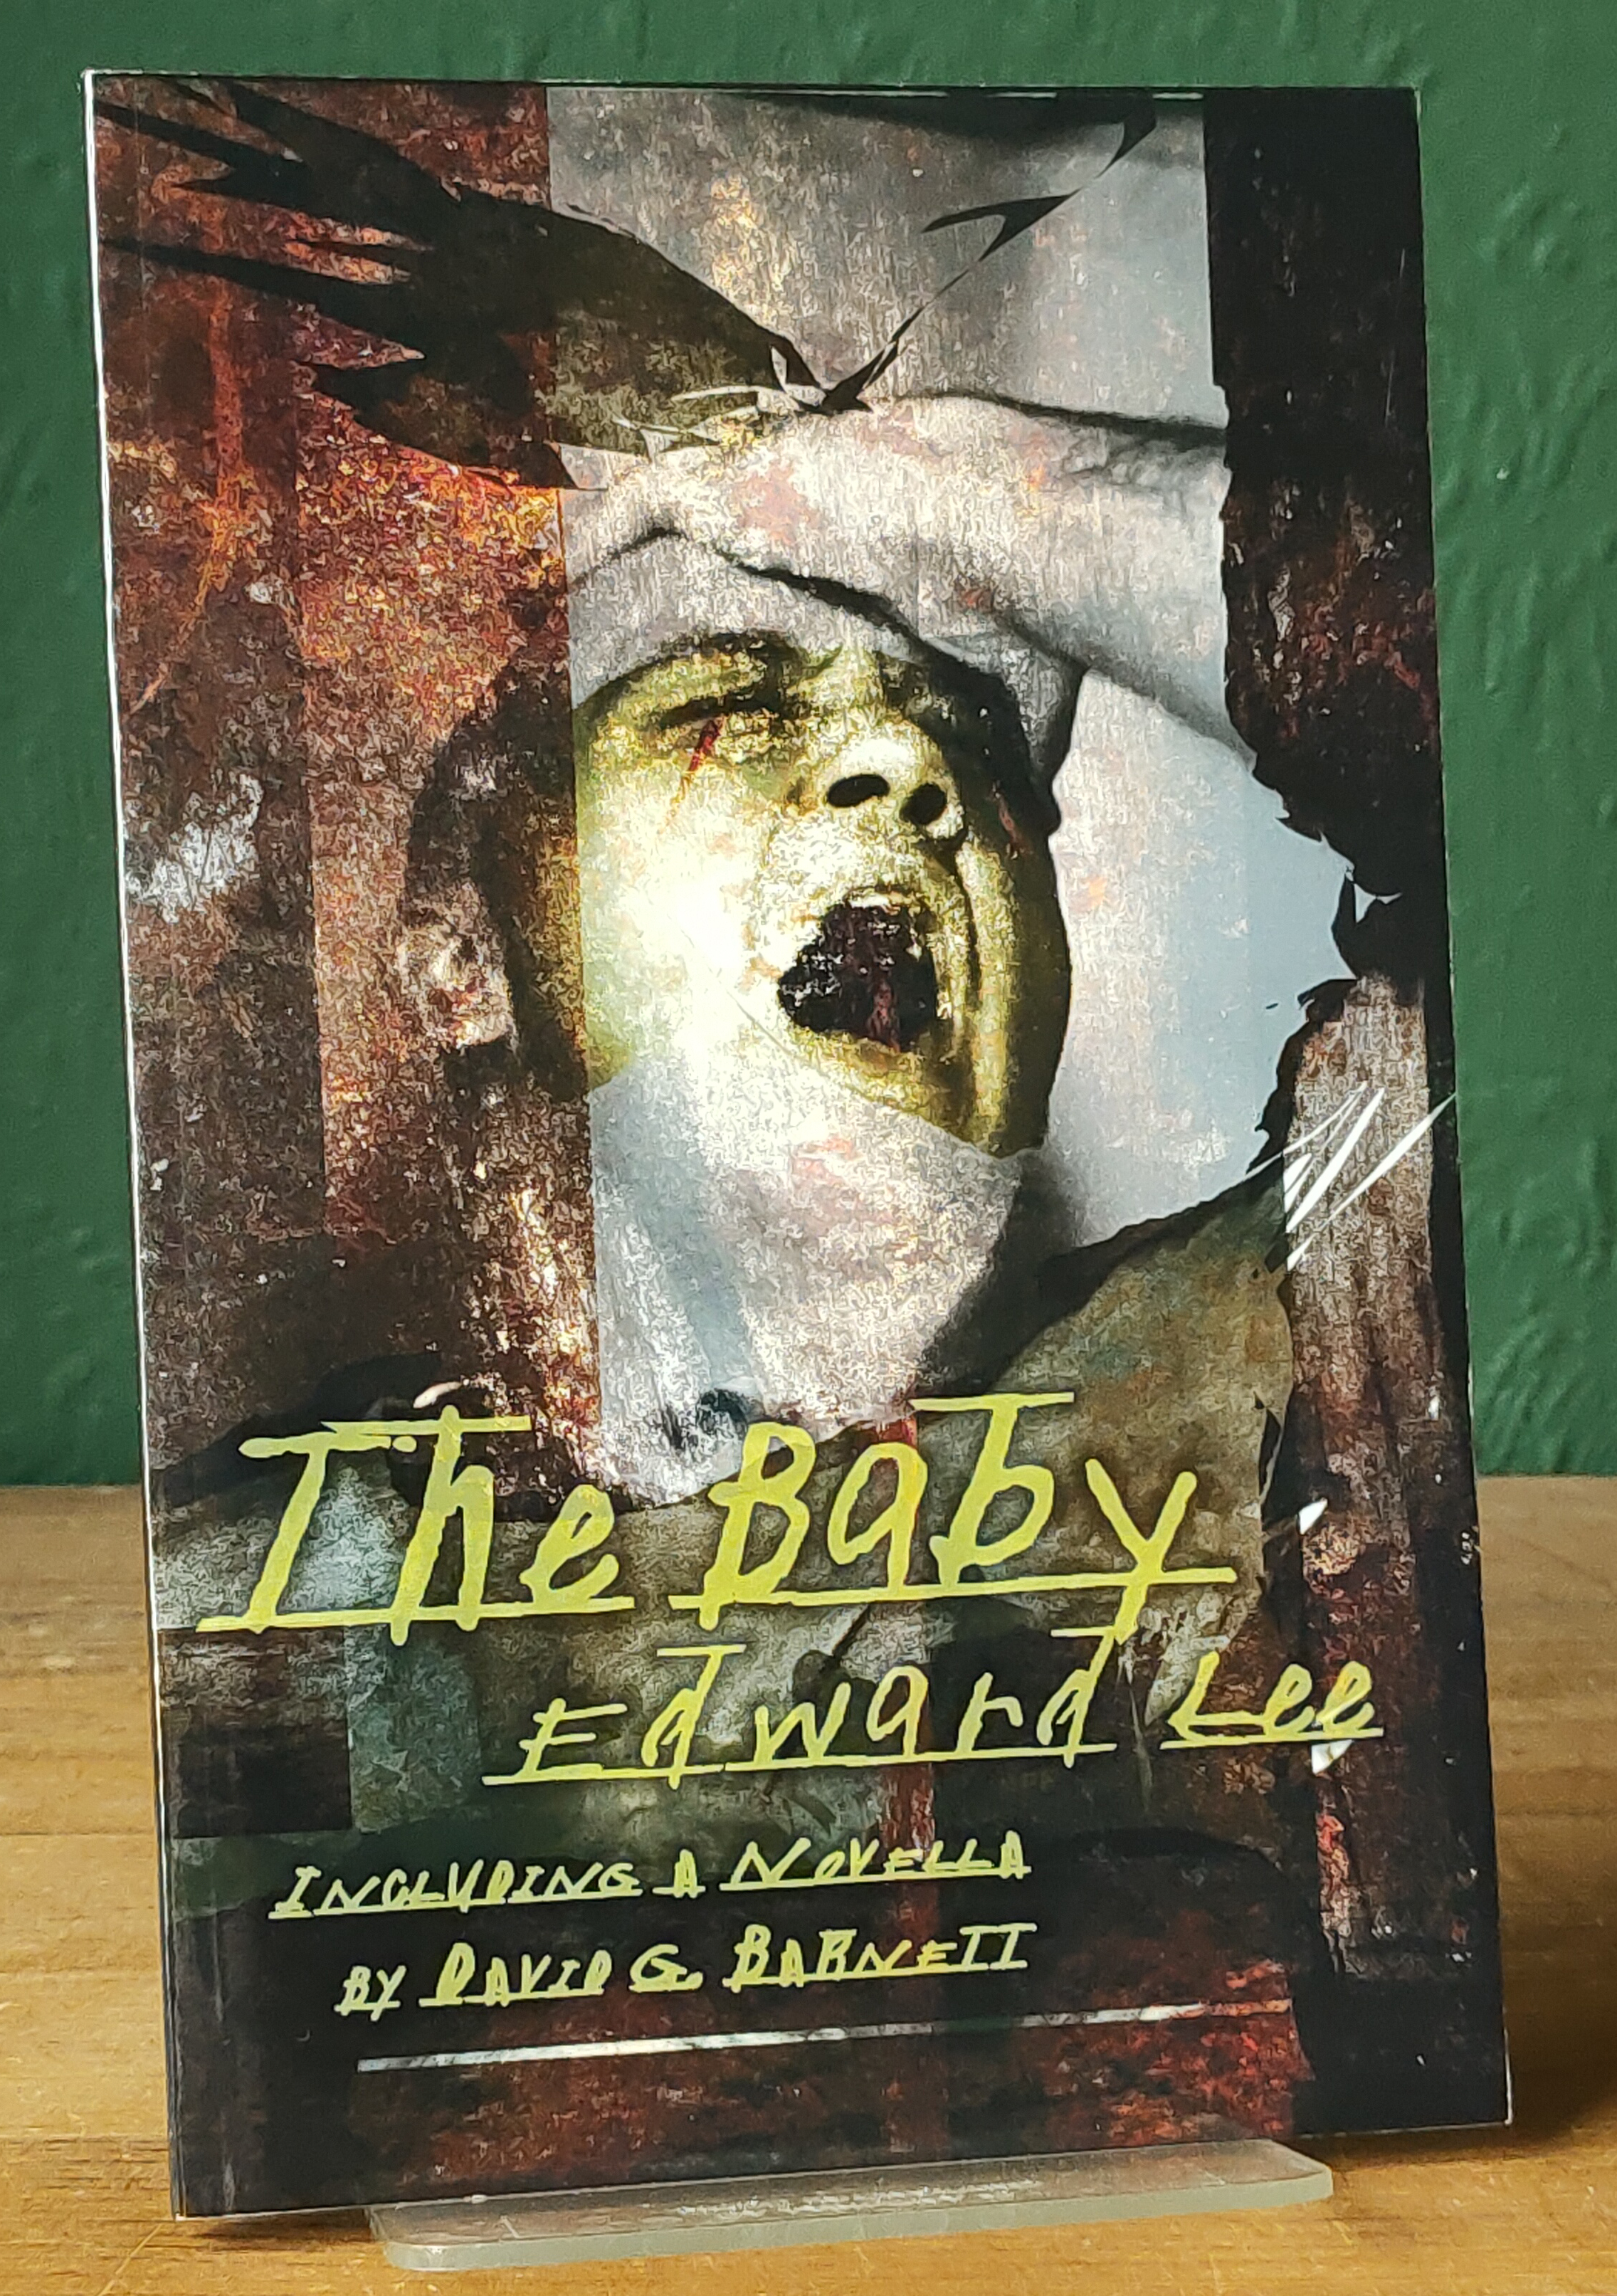 The Baby Limited Edition Chapbook